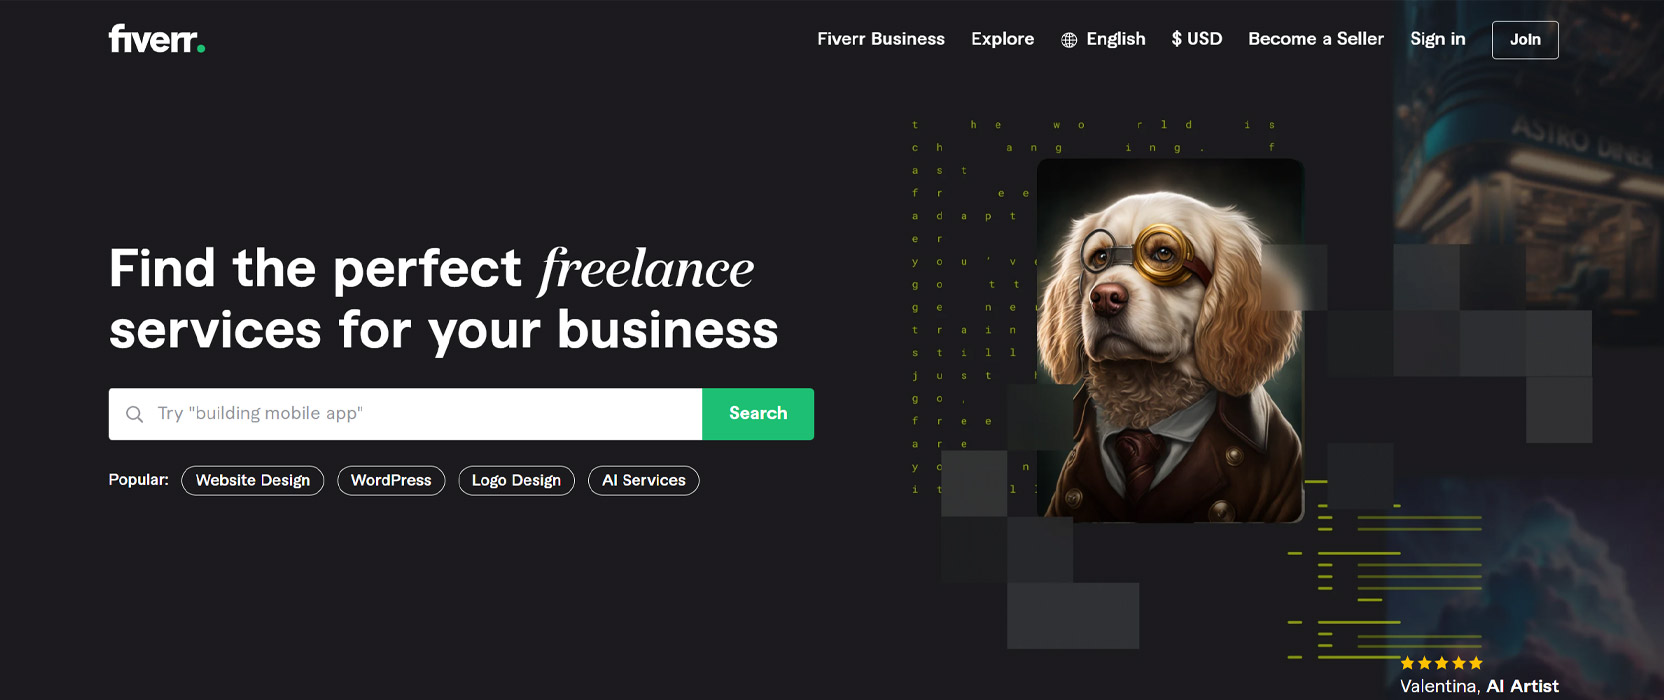 Screenshot of the Fiverr home page